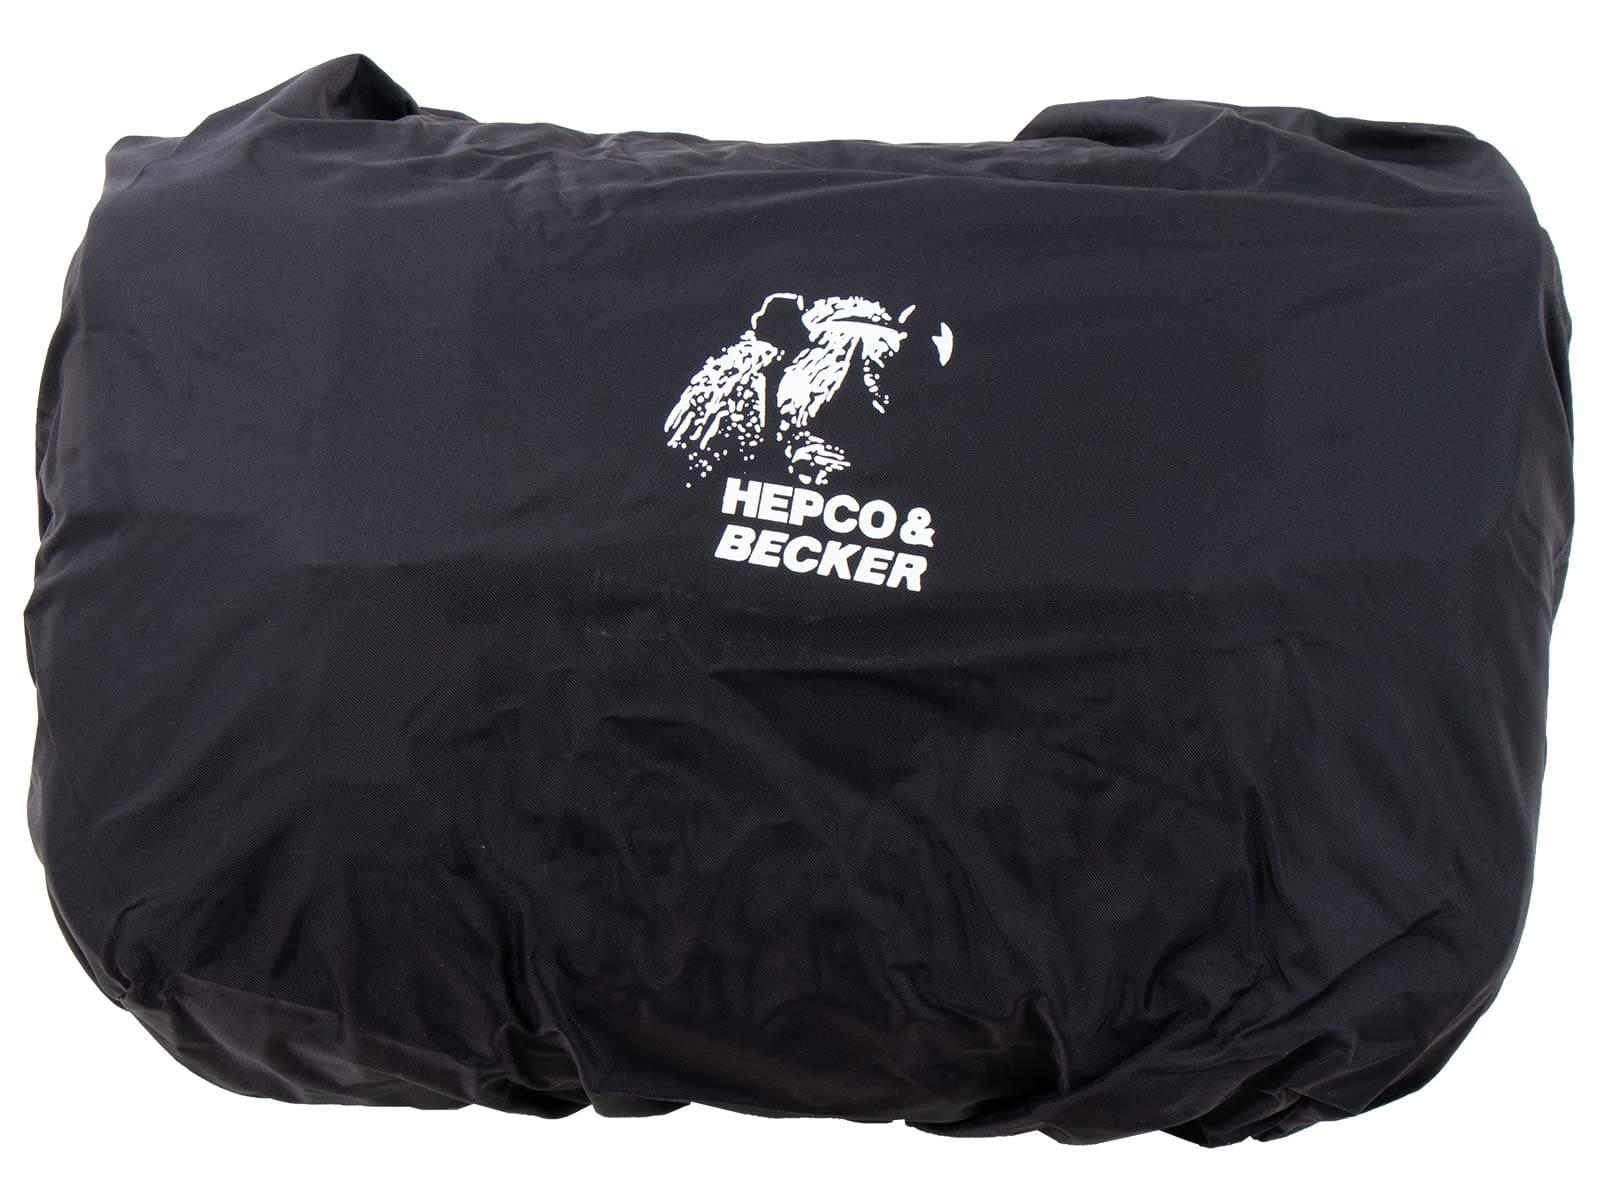 Rain cover (1 piece) for Legacy courier bag M